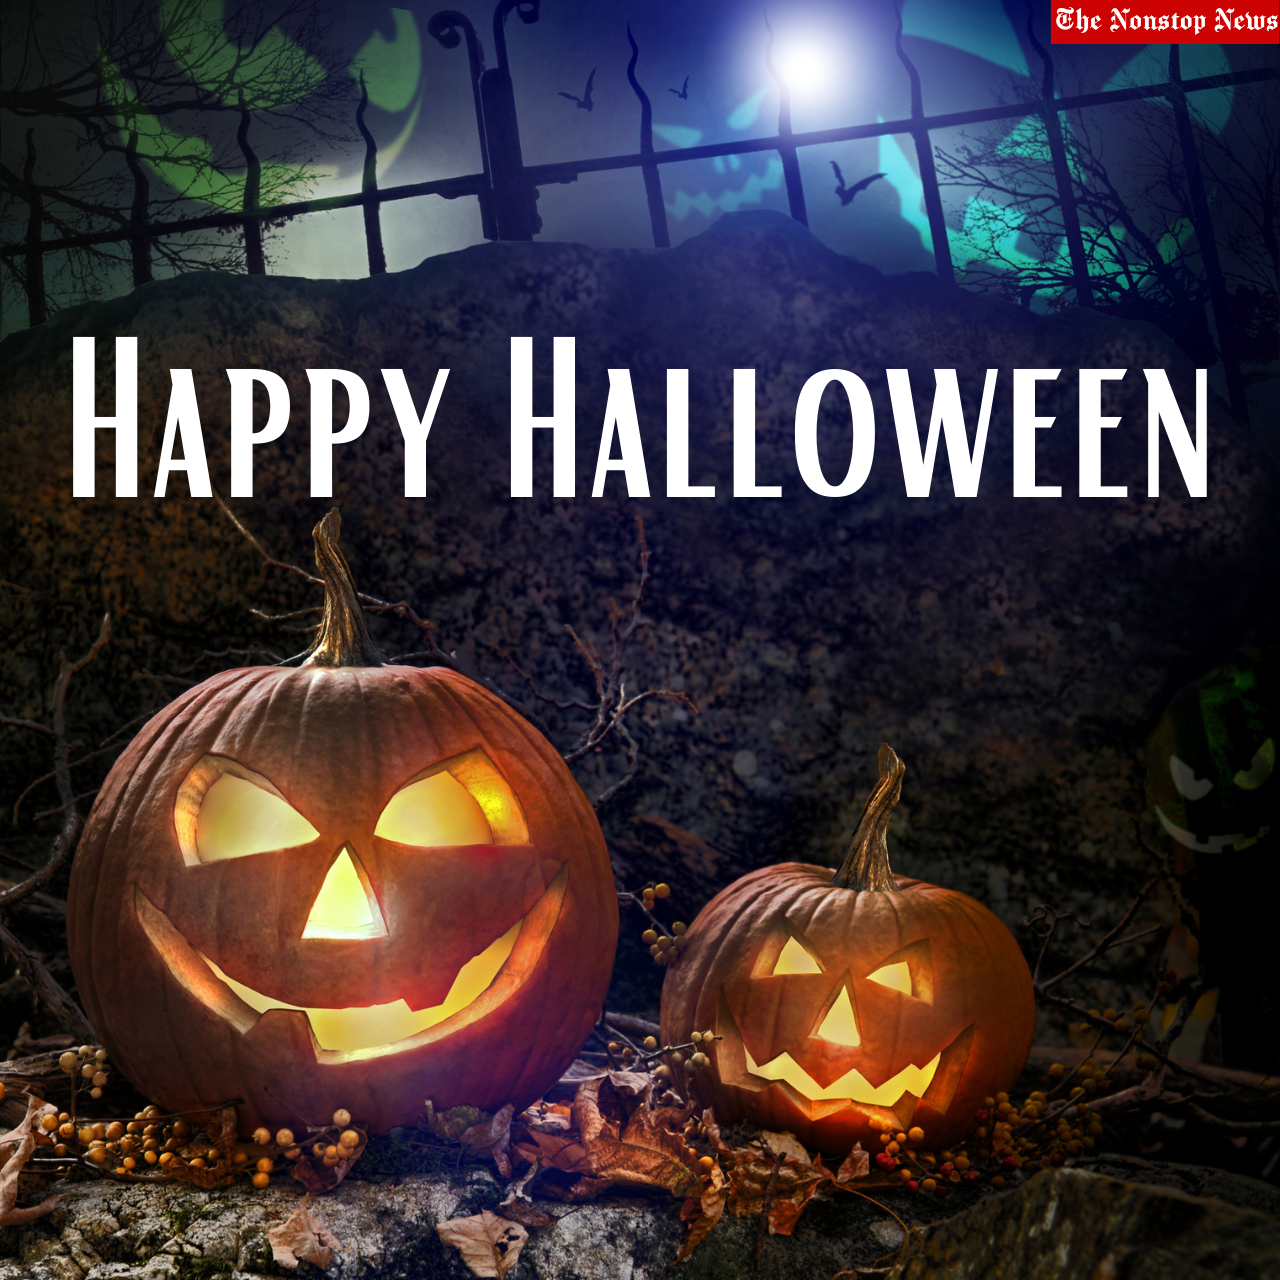 Halloween 2021 Wishes, Greetings, Quotes, Messages, HD Images, and Stickers for Boyfriend or Girlfriend